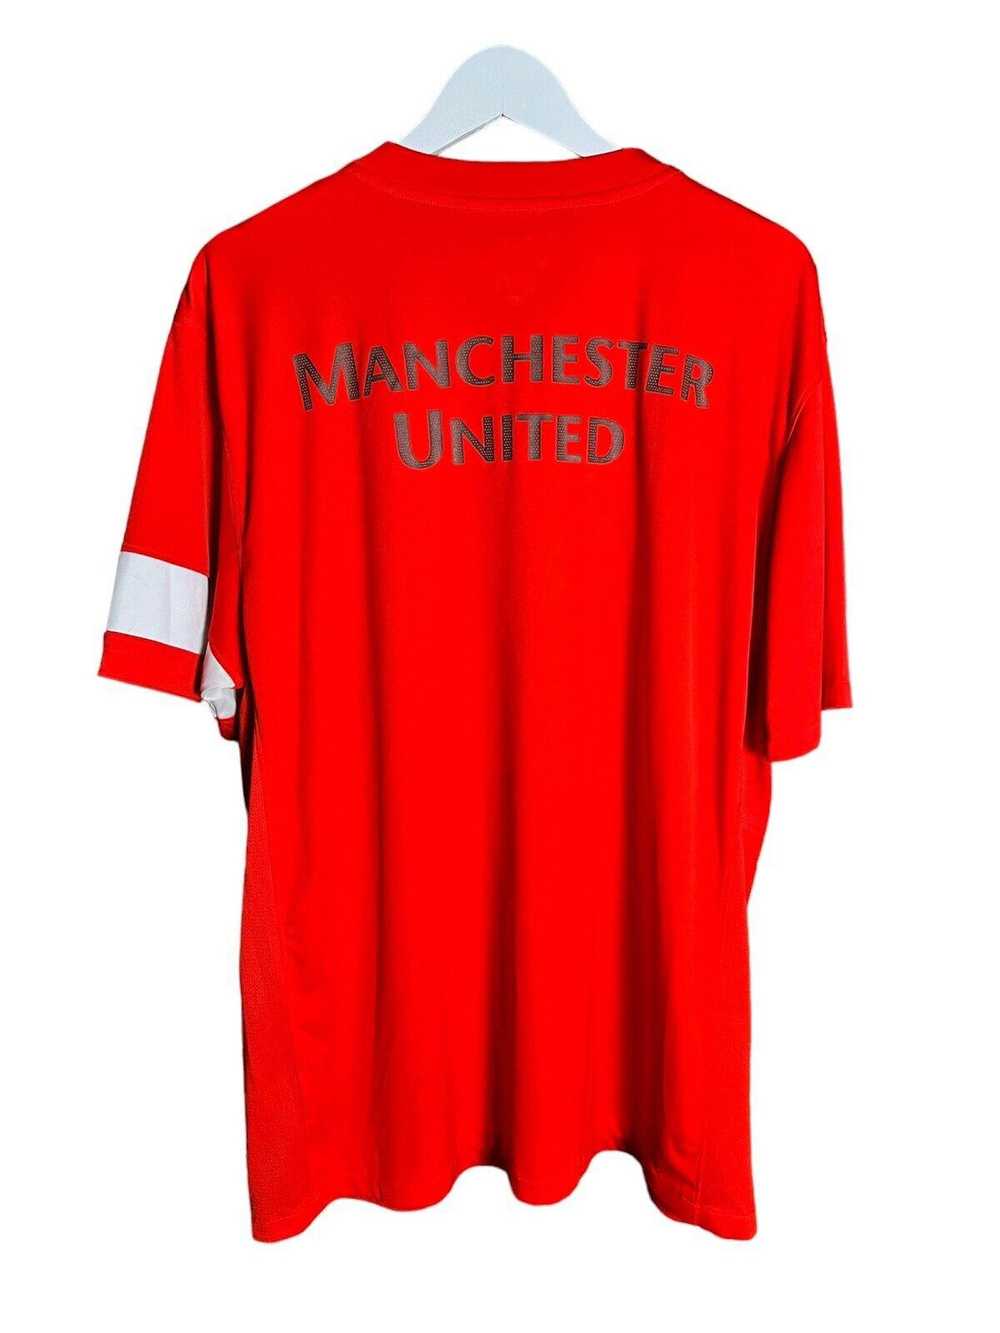 Nike 2010 Nike Manchester United Dr-Fit Jersey XL - image 6